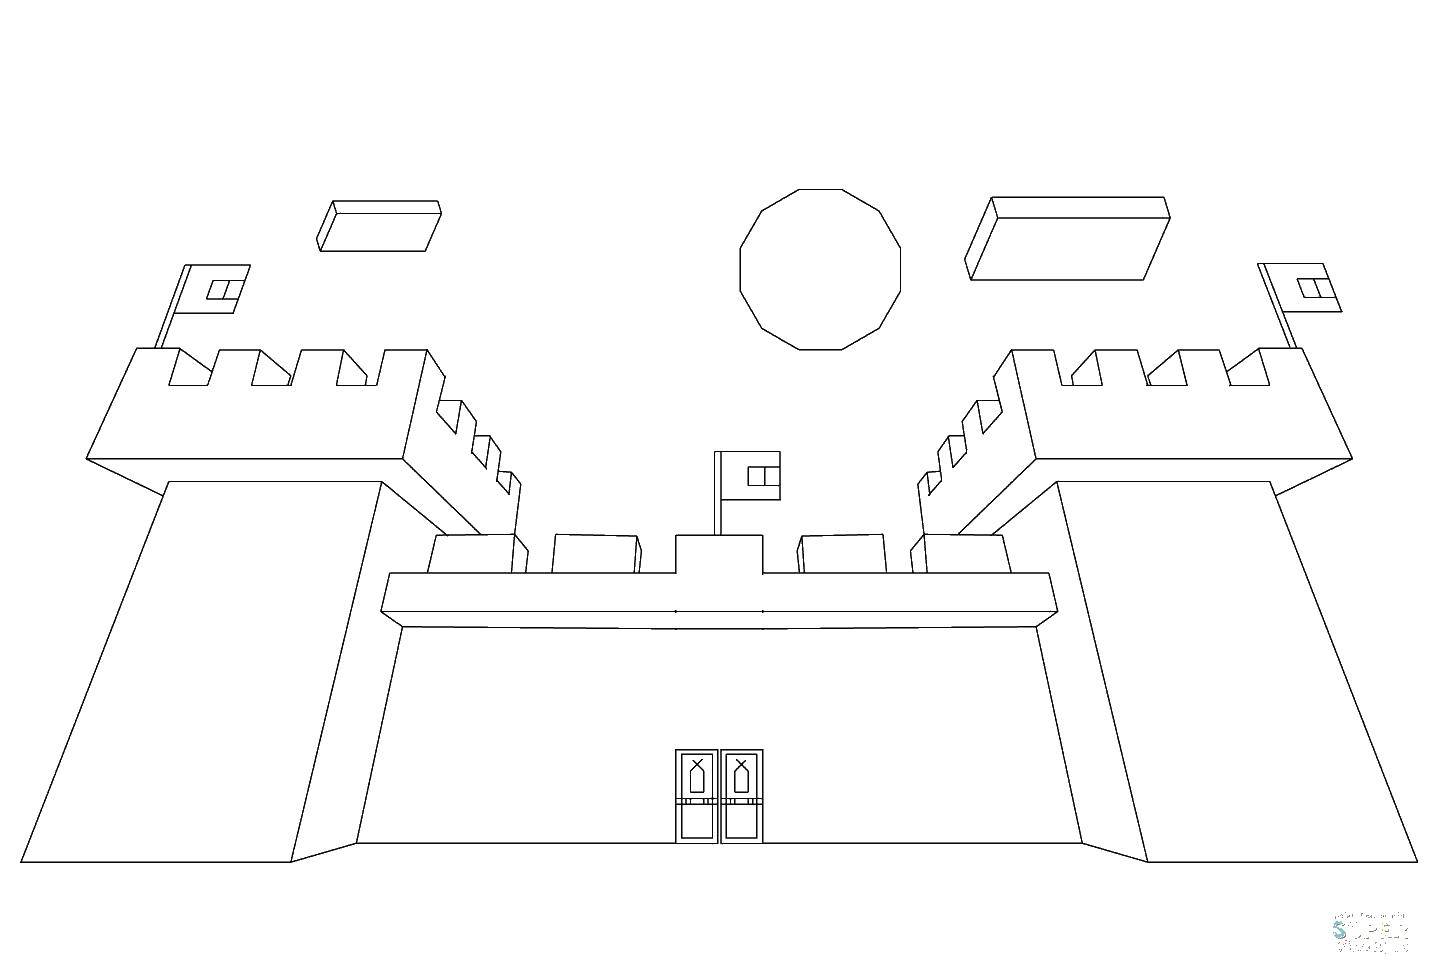 Coloring Chinese castle. Category Locks . Tags:  the castle, towers, flags.